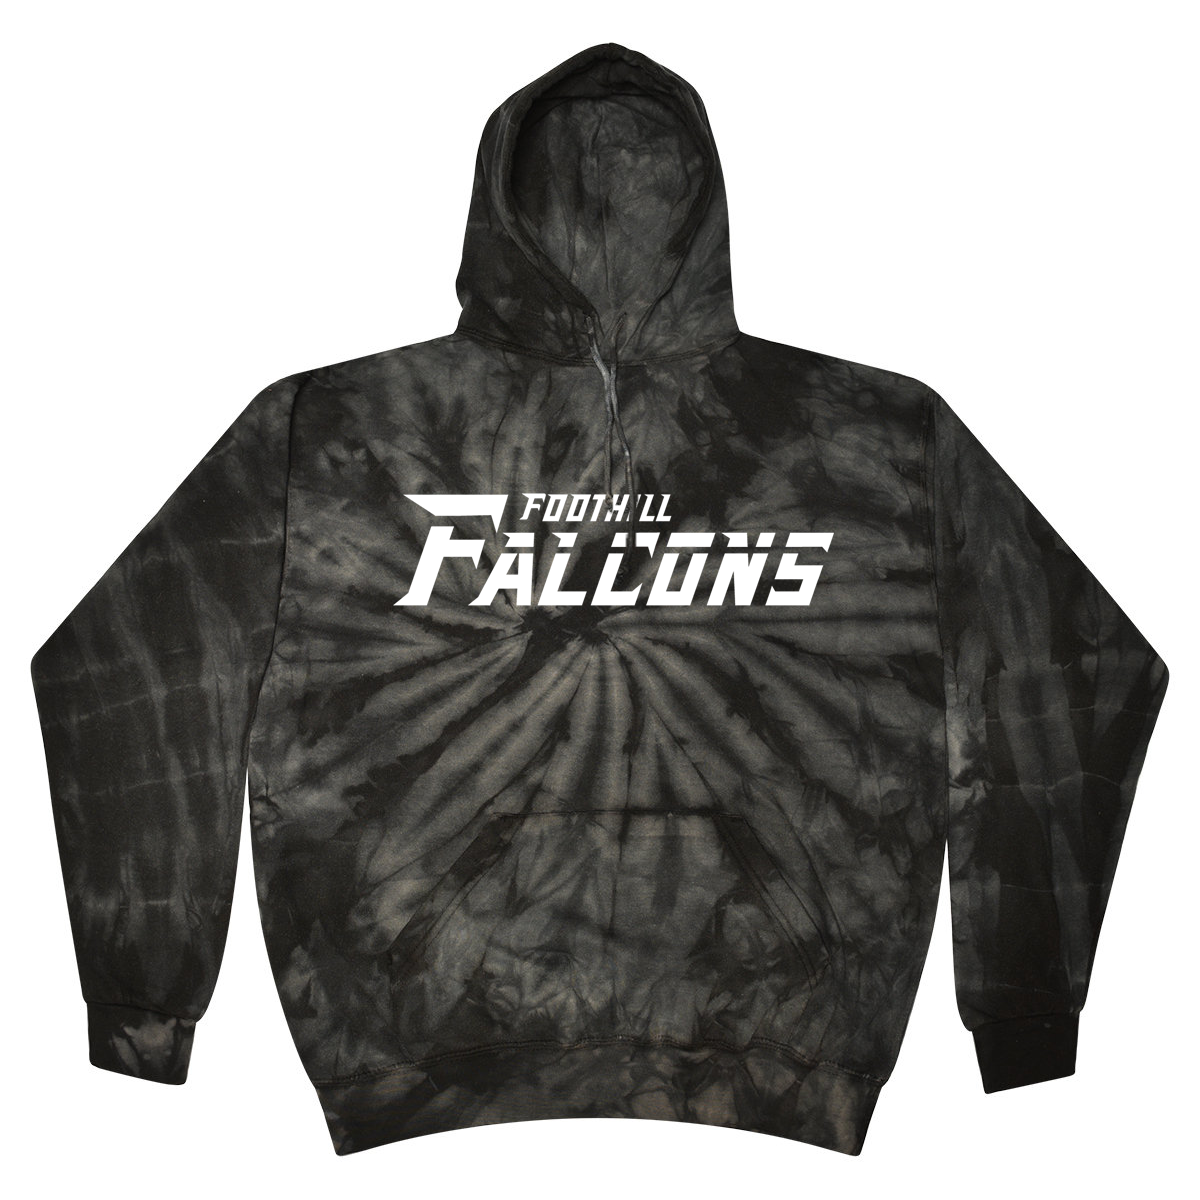 Foothill Falcons Tie Dyed Pullover Hooded Sweatshirt